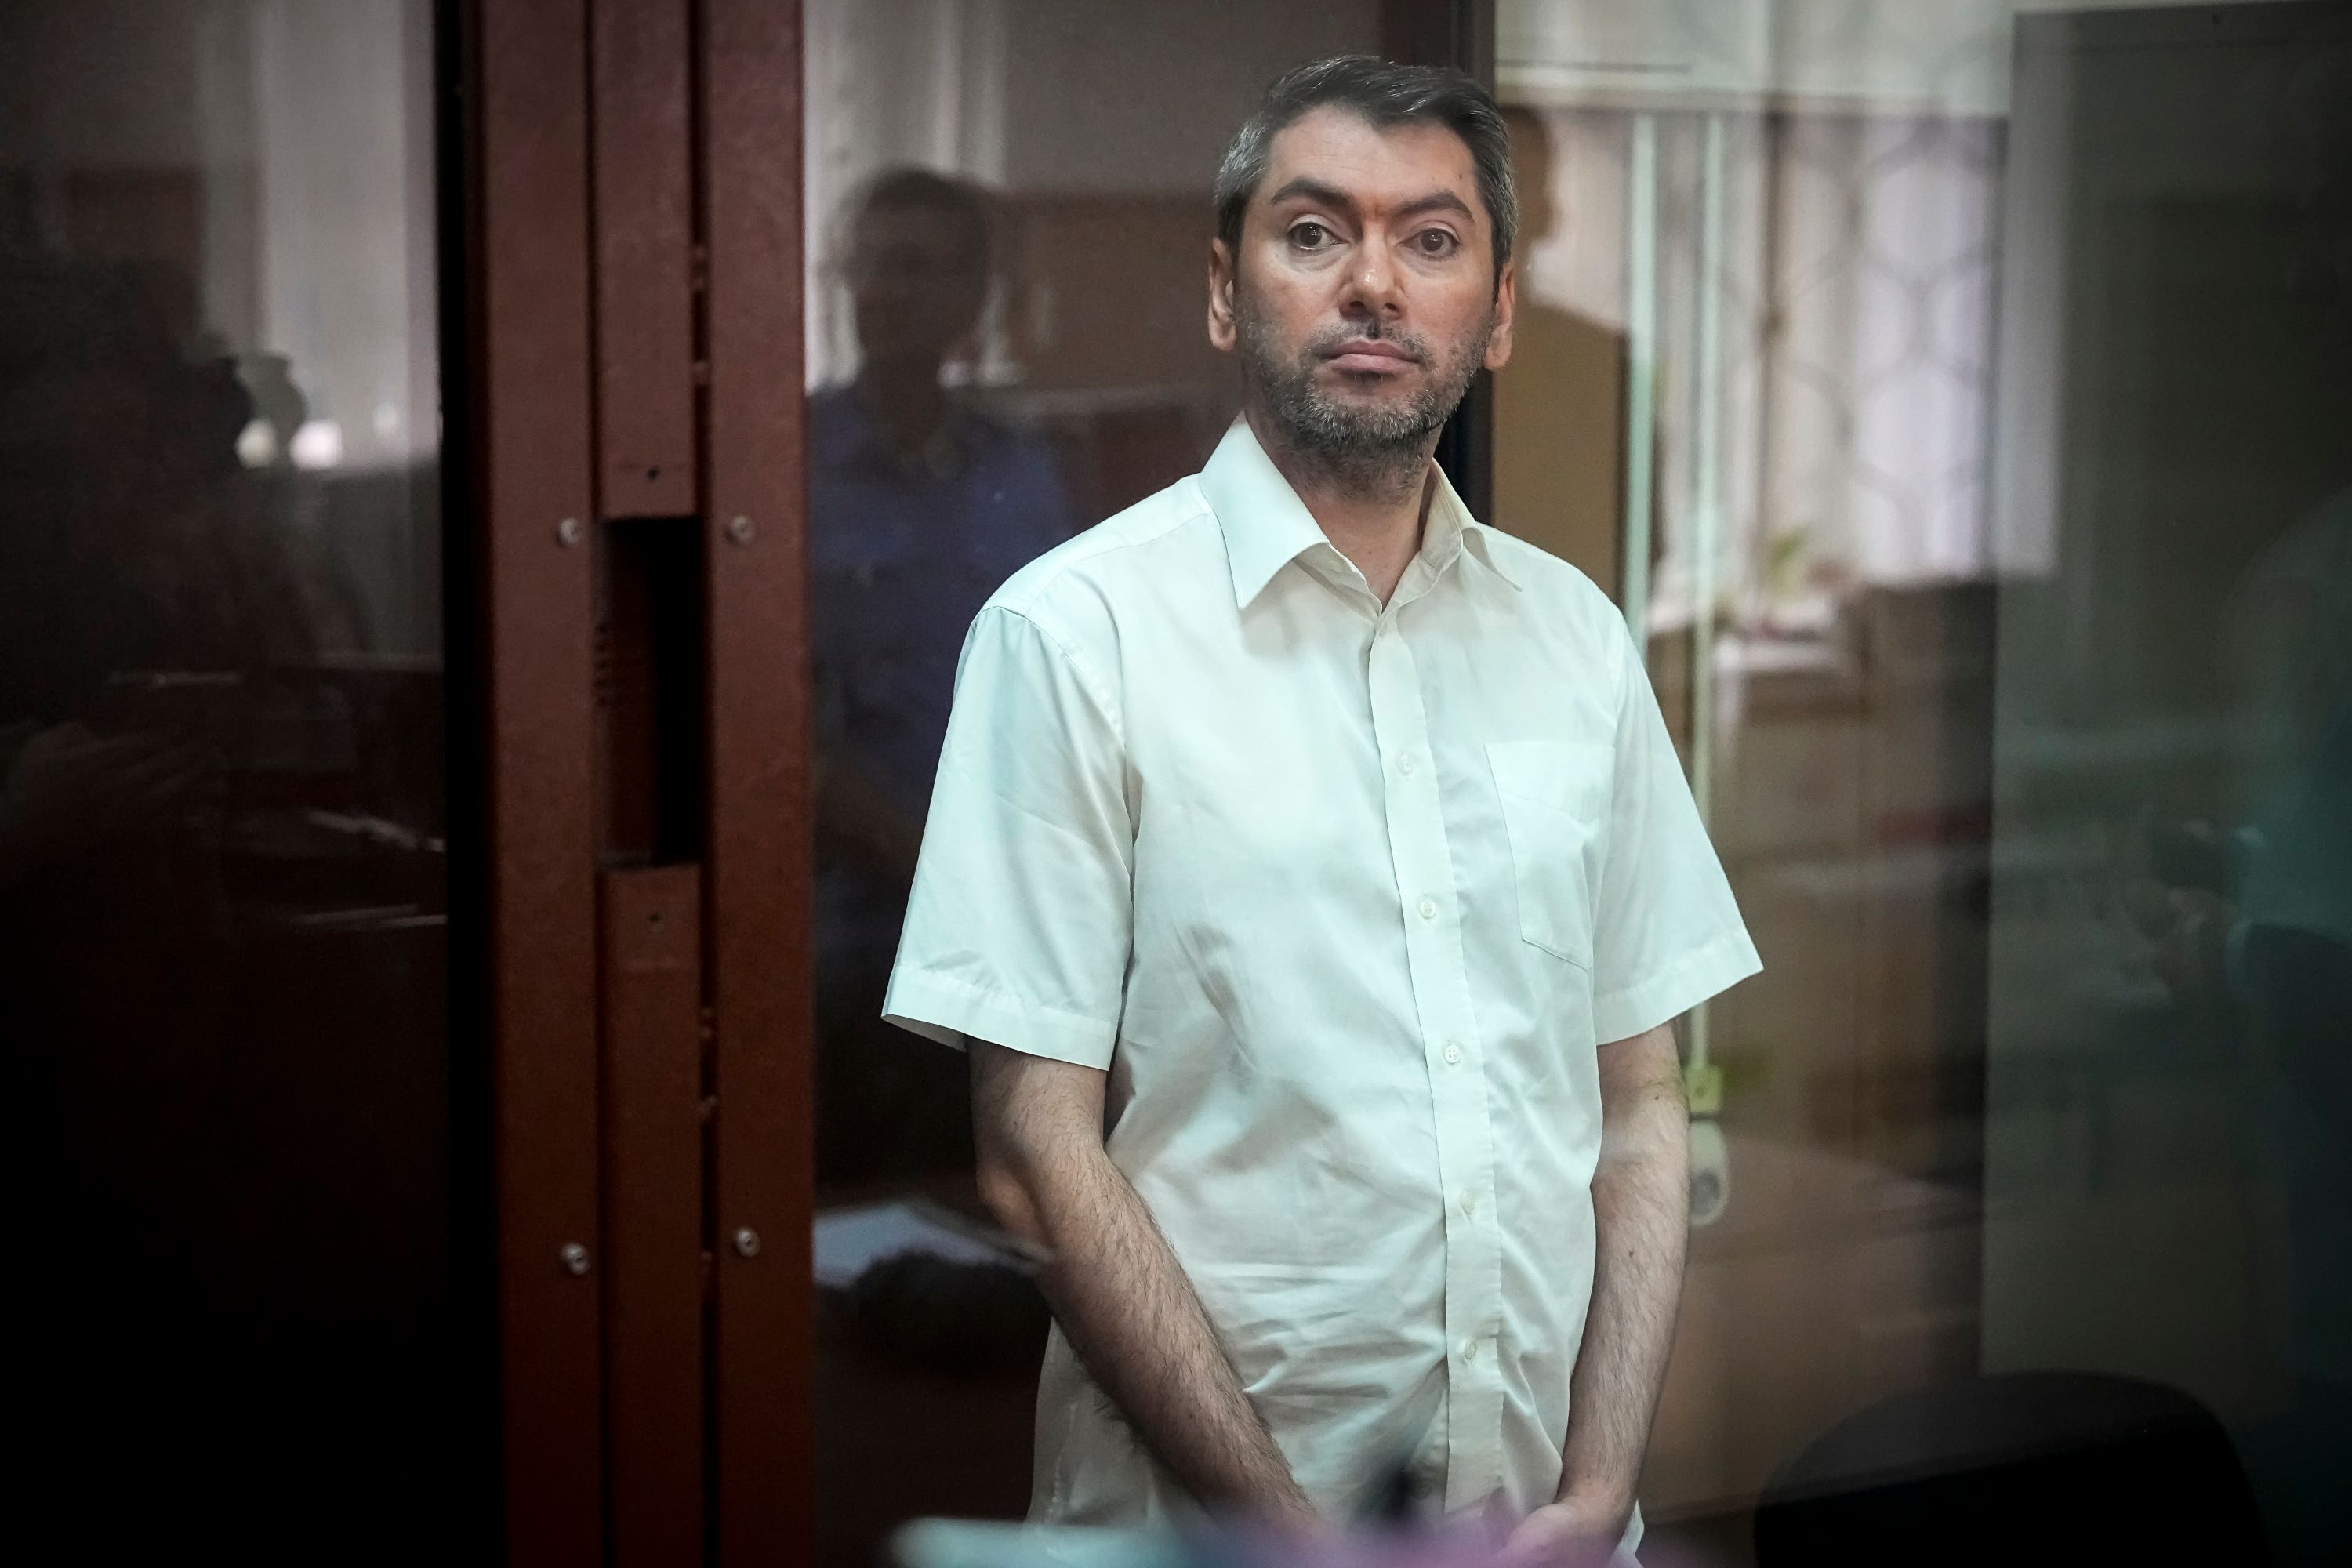 Grigory Melkonyants, co-chair of Russia’s leading election monitor Golos, is awaiting trial on charges widely seen as an attempt to pressure the group ahead of this month’s presidential election.